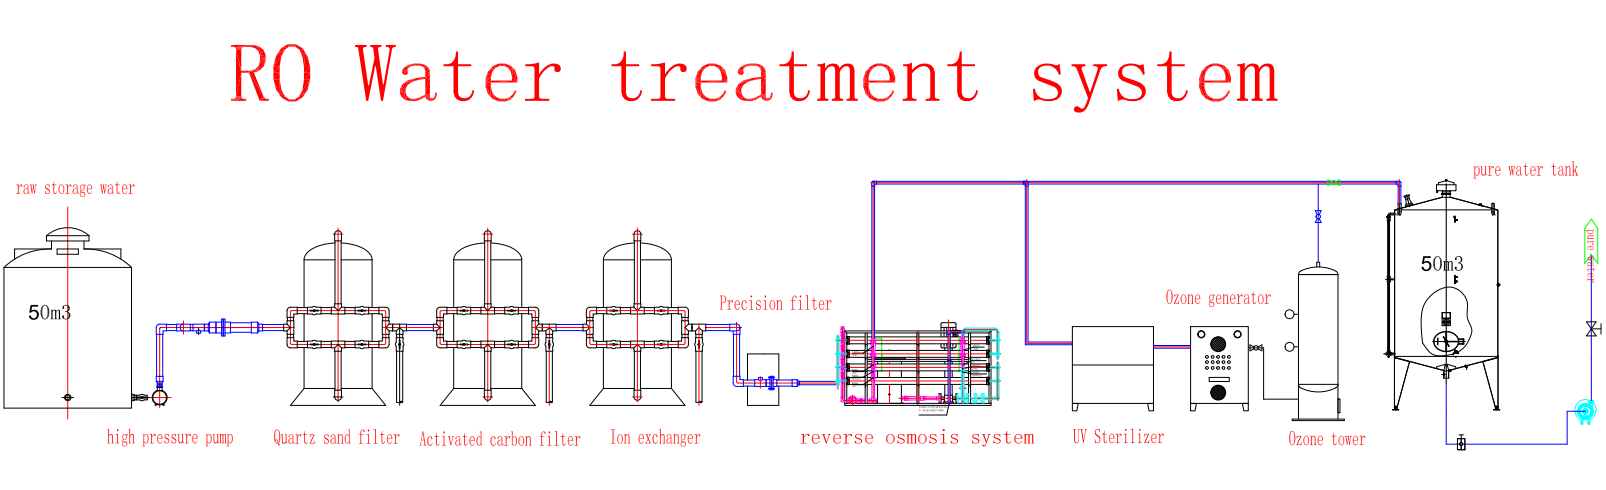 water treatment system 2